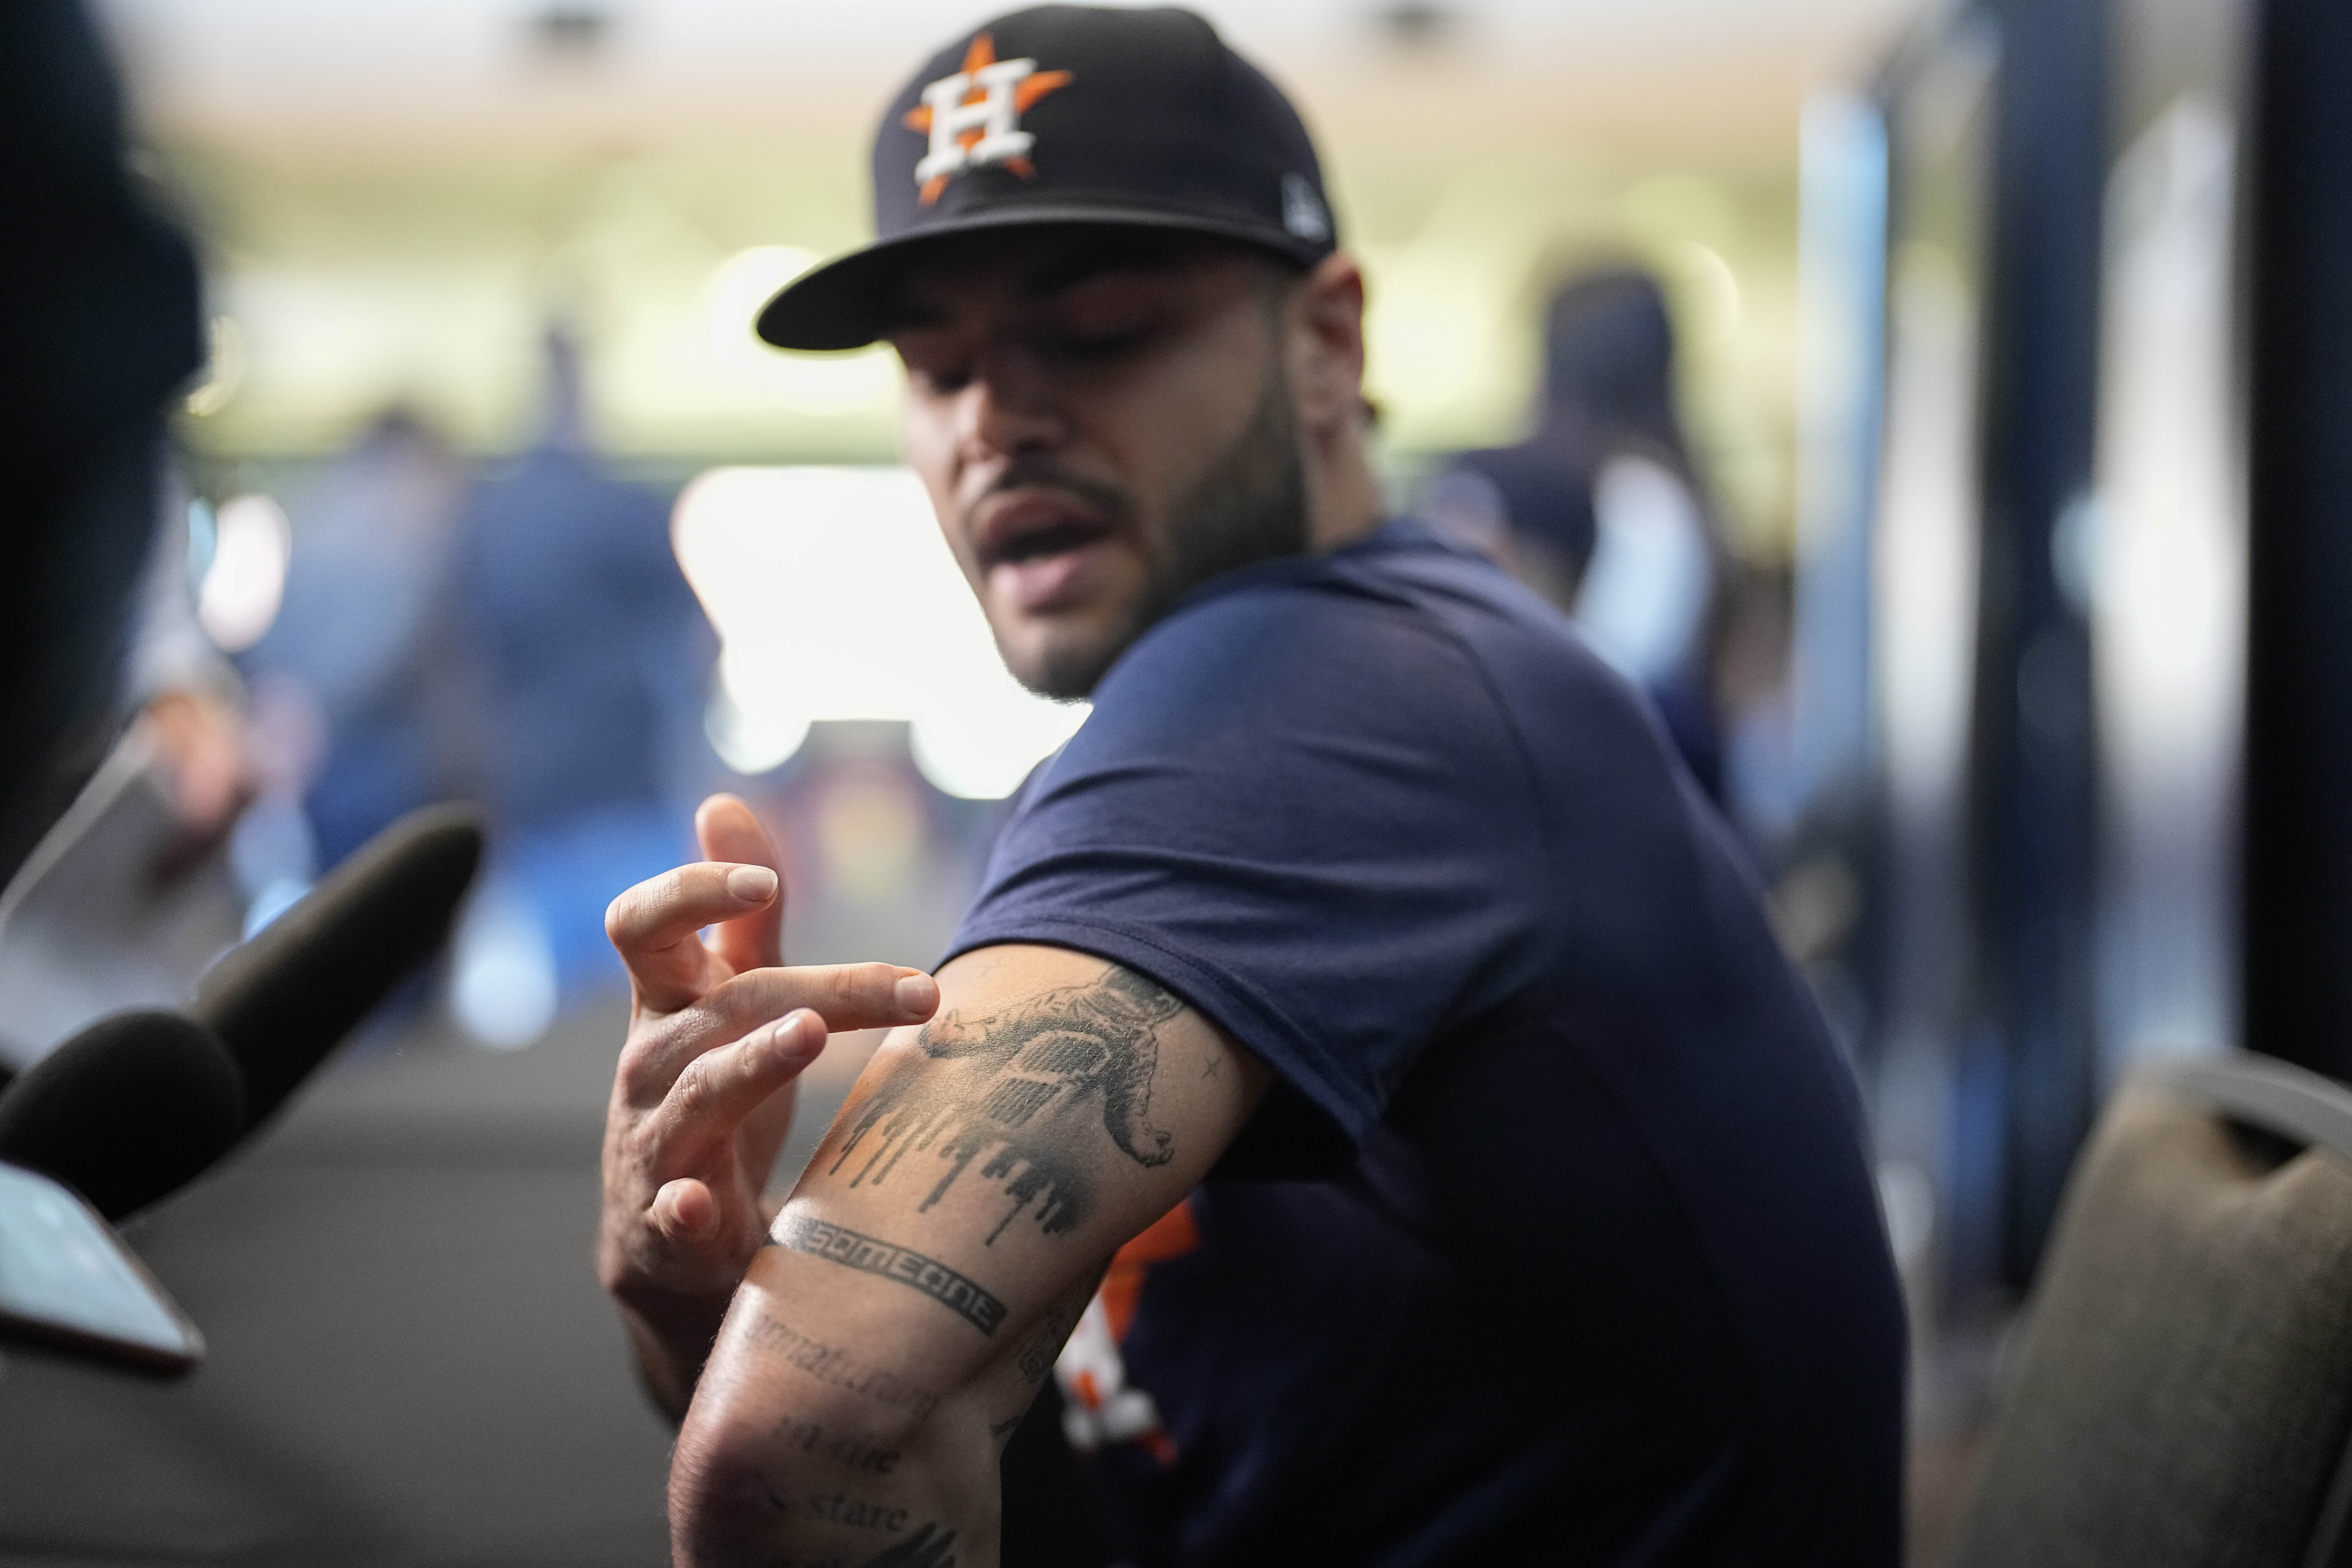 Astros pitcher, Tampa native Lance McCullers Jr. inks left arm